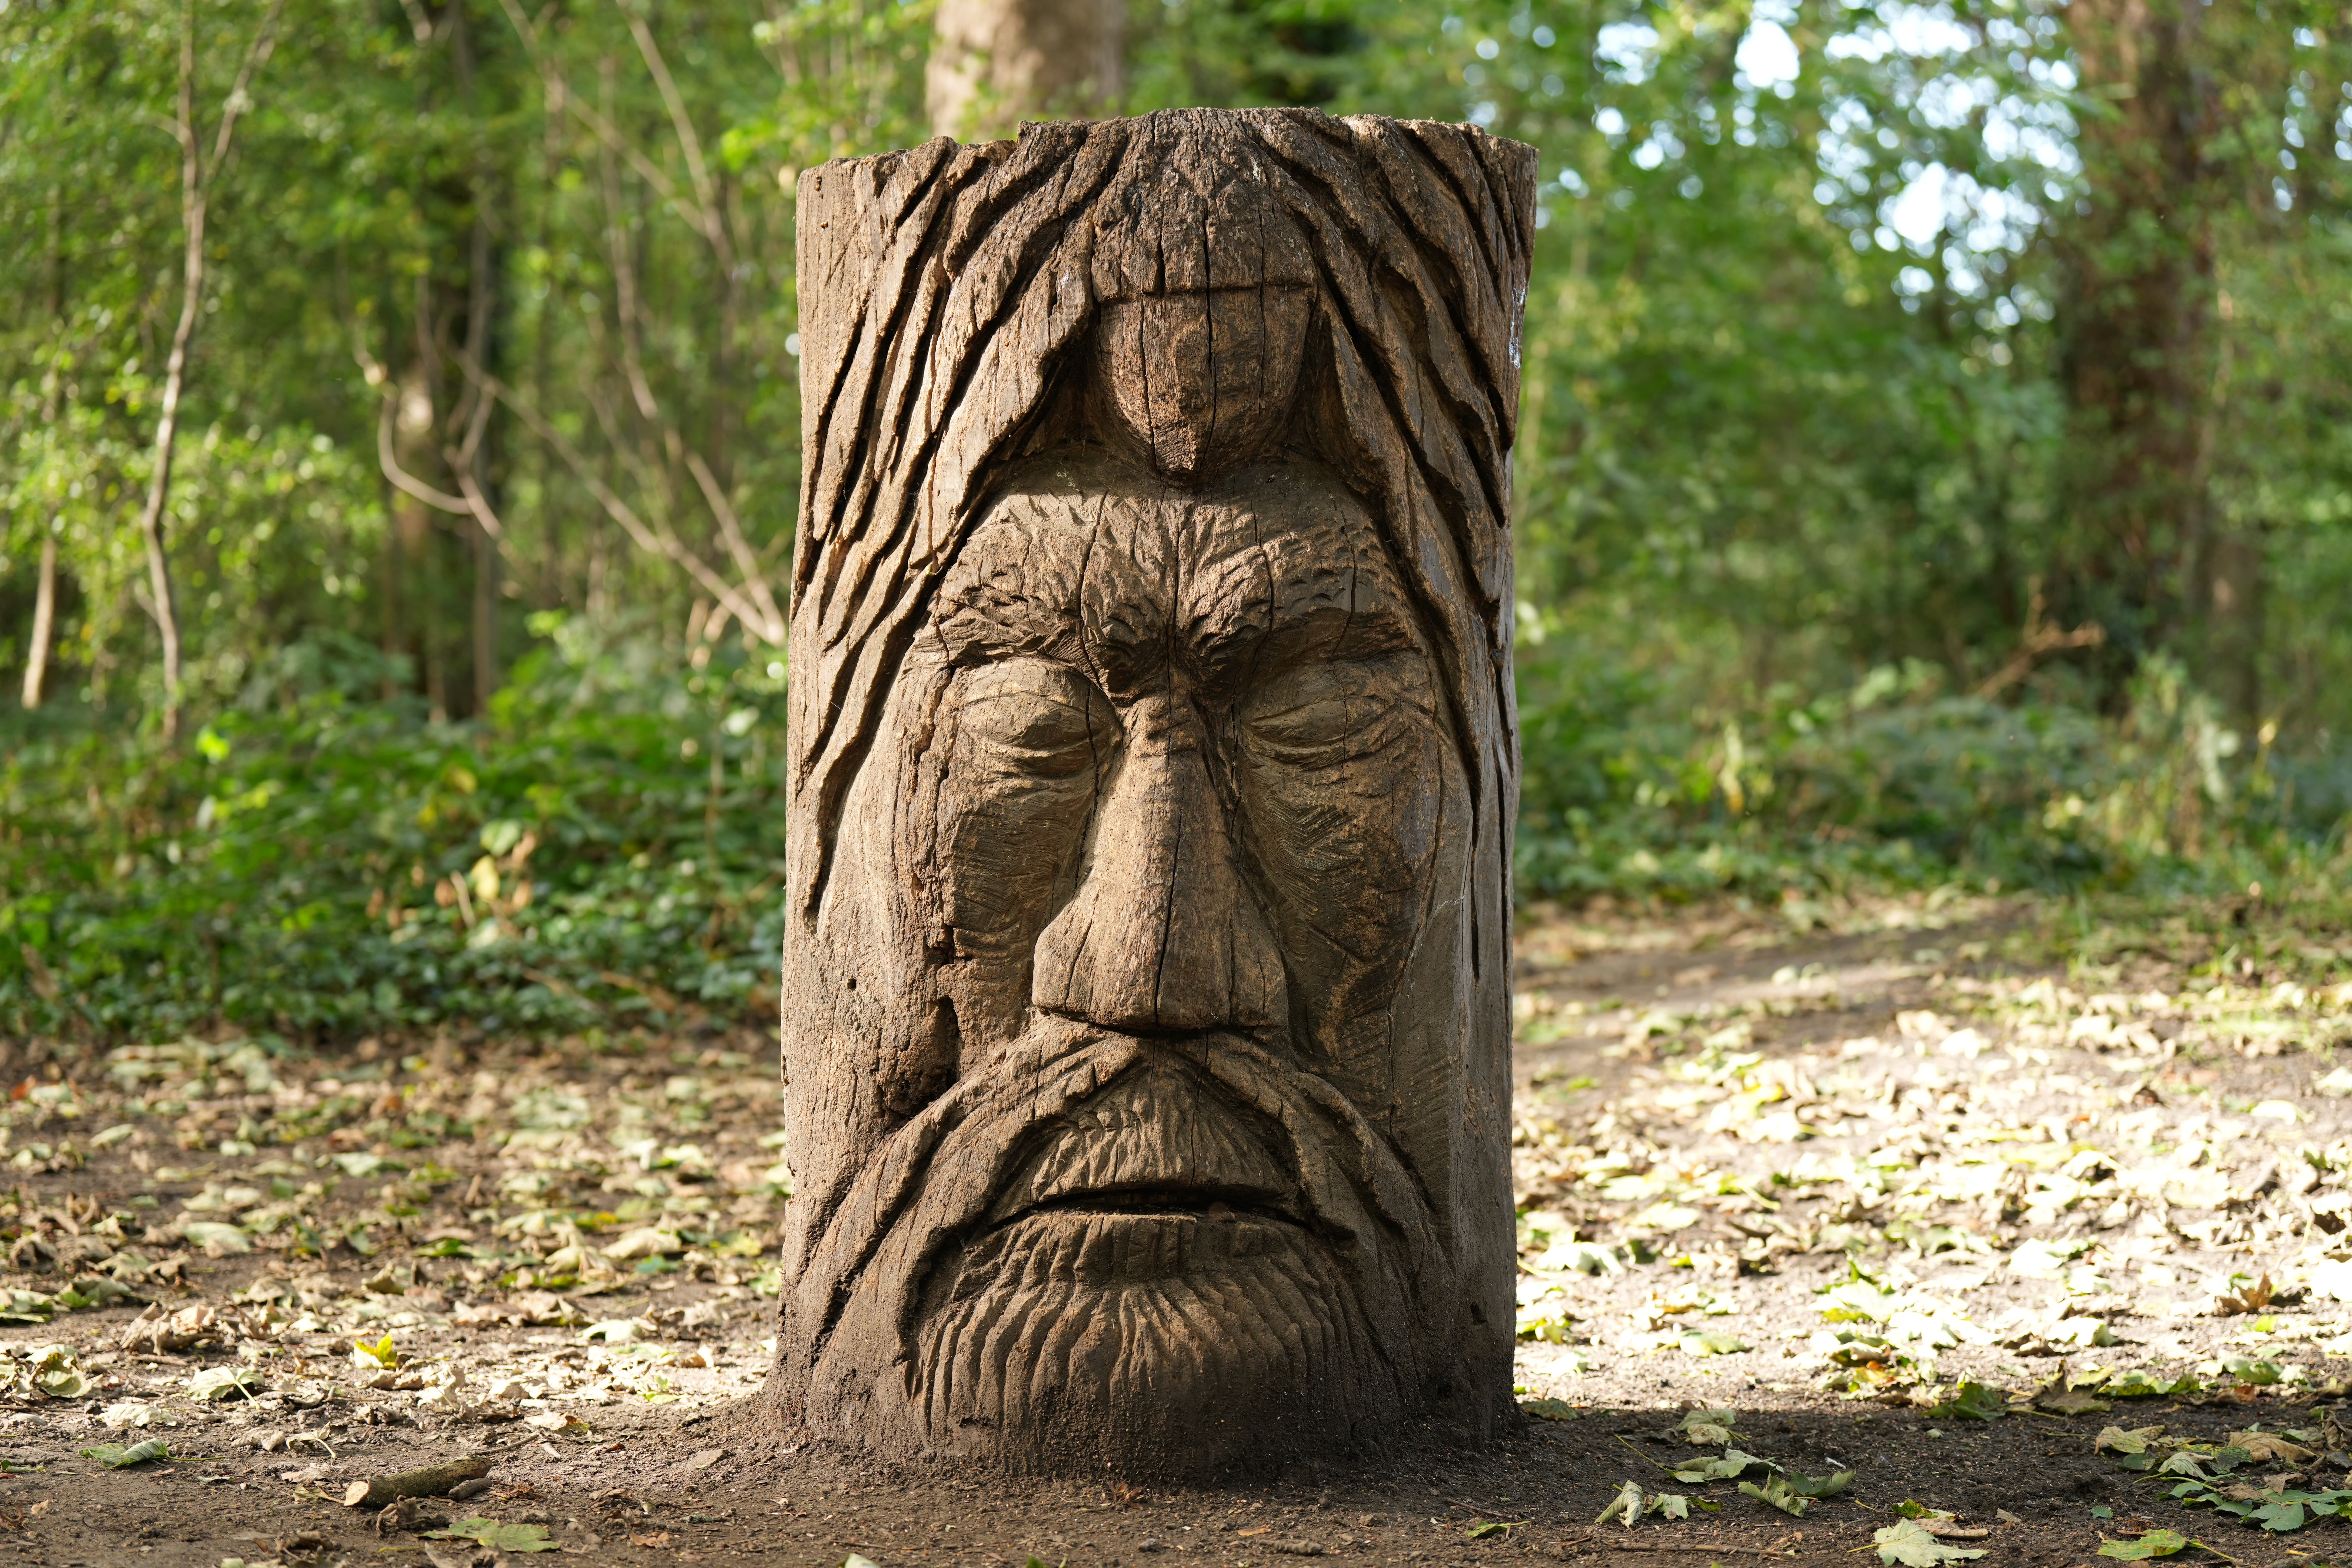 Wooden head, 1/80s, f/2.8, ISO250, Sony 70-200mm at 70mm, with Sony A1